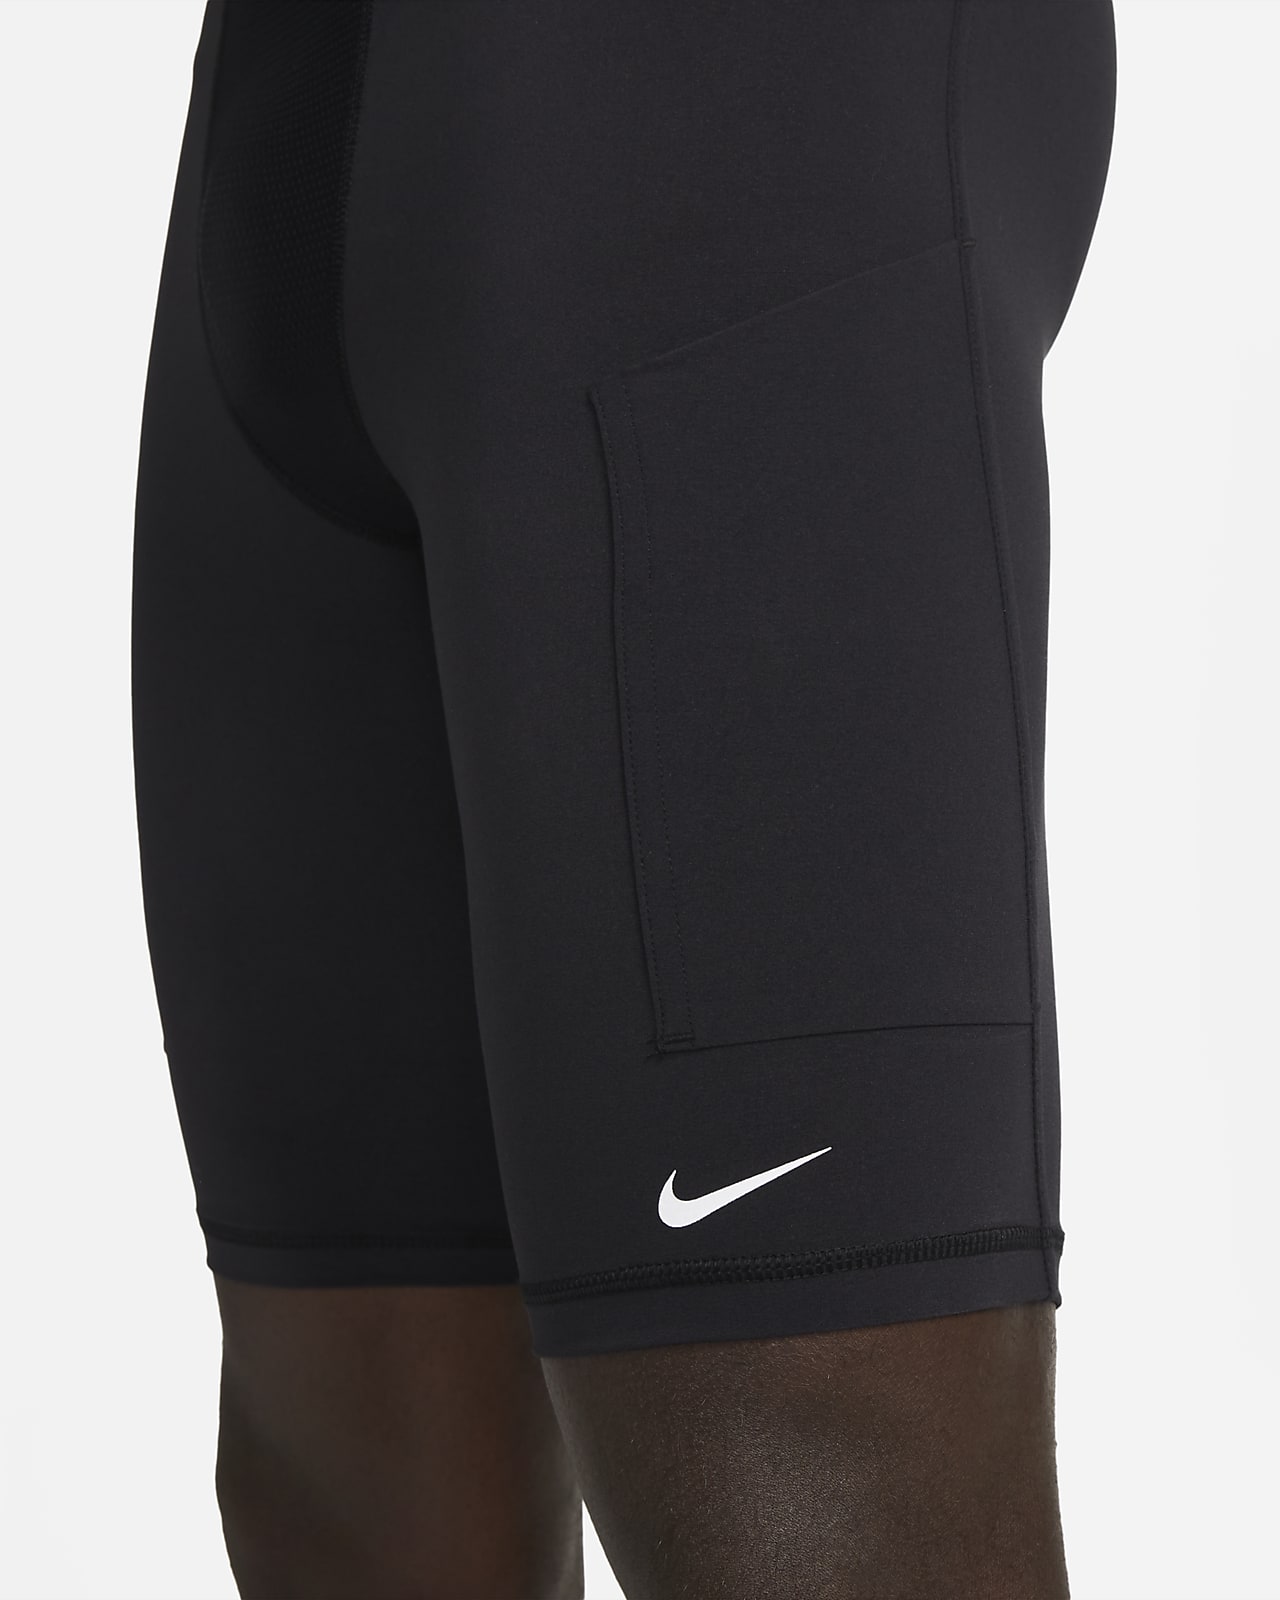 Shorts Tights. Nike IE